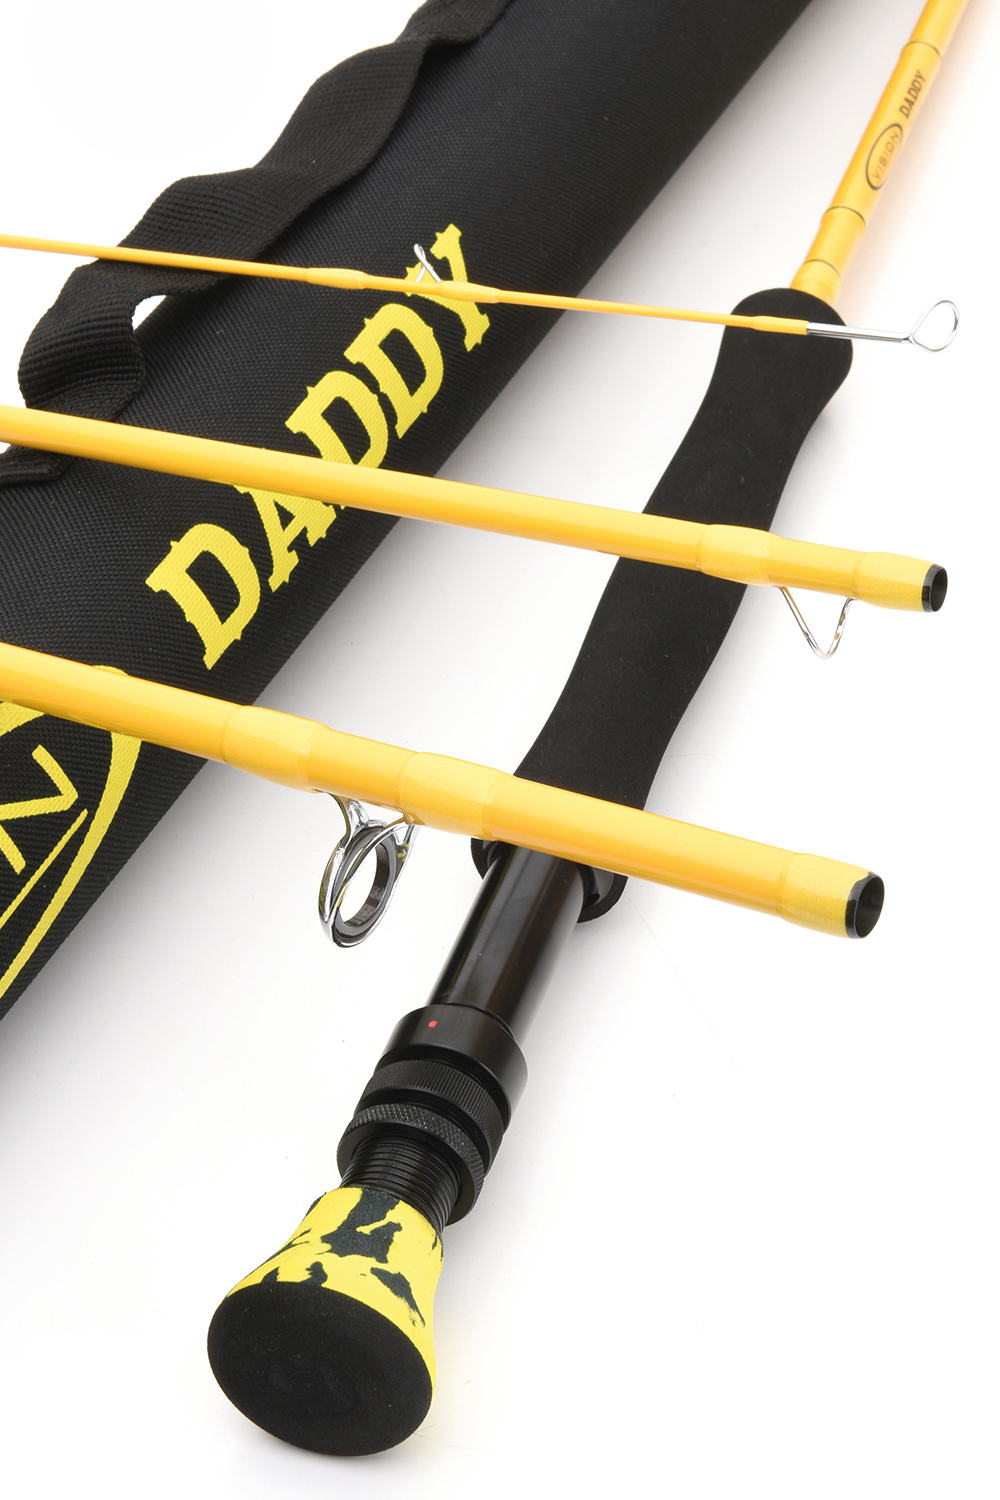 Vision Daddy Fly Rod 9 Foot #9 For Fly Fishing (Length 9ft / 2.75m)